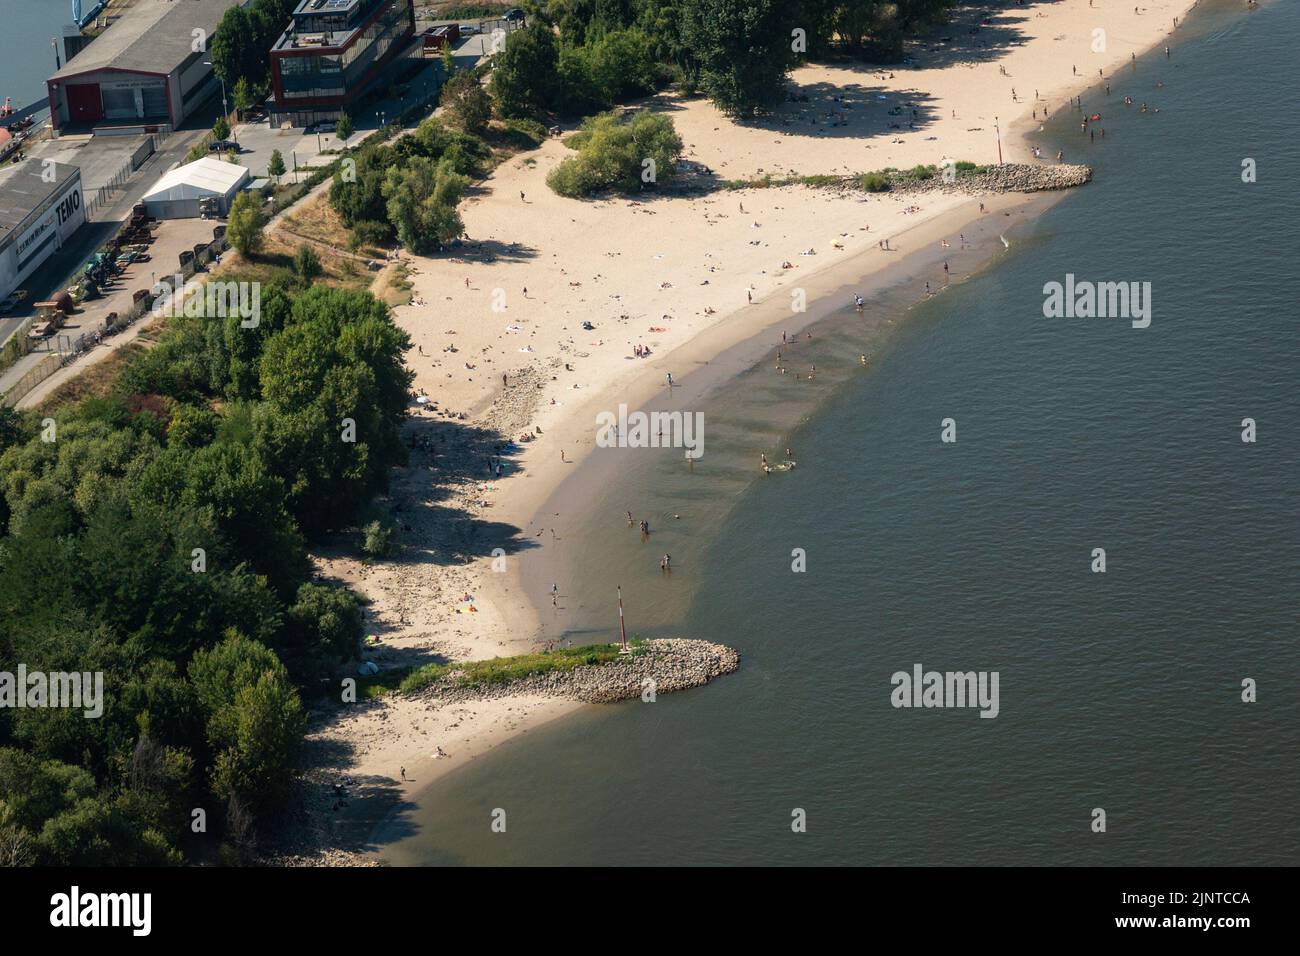 Düsseldorf, NRW, Germany. 13th Aug, 2022. People use the wider sandy beaches to sunbathe and swim in the river. The River Rhine, one of the busiest inland waterways in the world, has been strongly affected by the ongoing drought and resulting low water levels, caused by prolonged heat of up to 40 degrees and very little rain in the last few weeks. The shipping lane has narrowed down considerably, slowing down traffic, most vessels have also had to considerably reduce their freight weight, leading to supply issues and higher shipping prices. Credit: Imageplotter/Alamy Live News Stock Photo